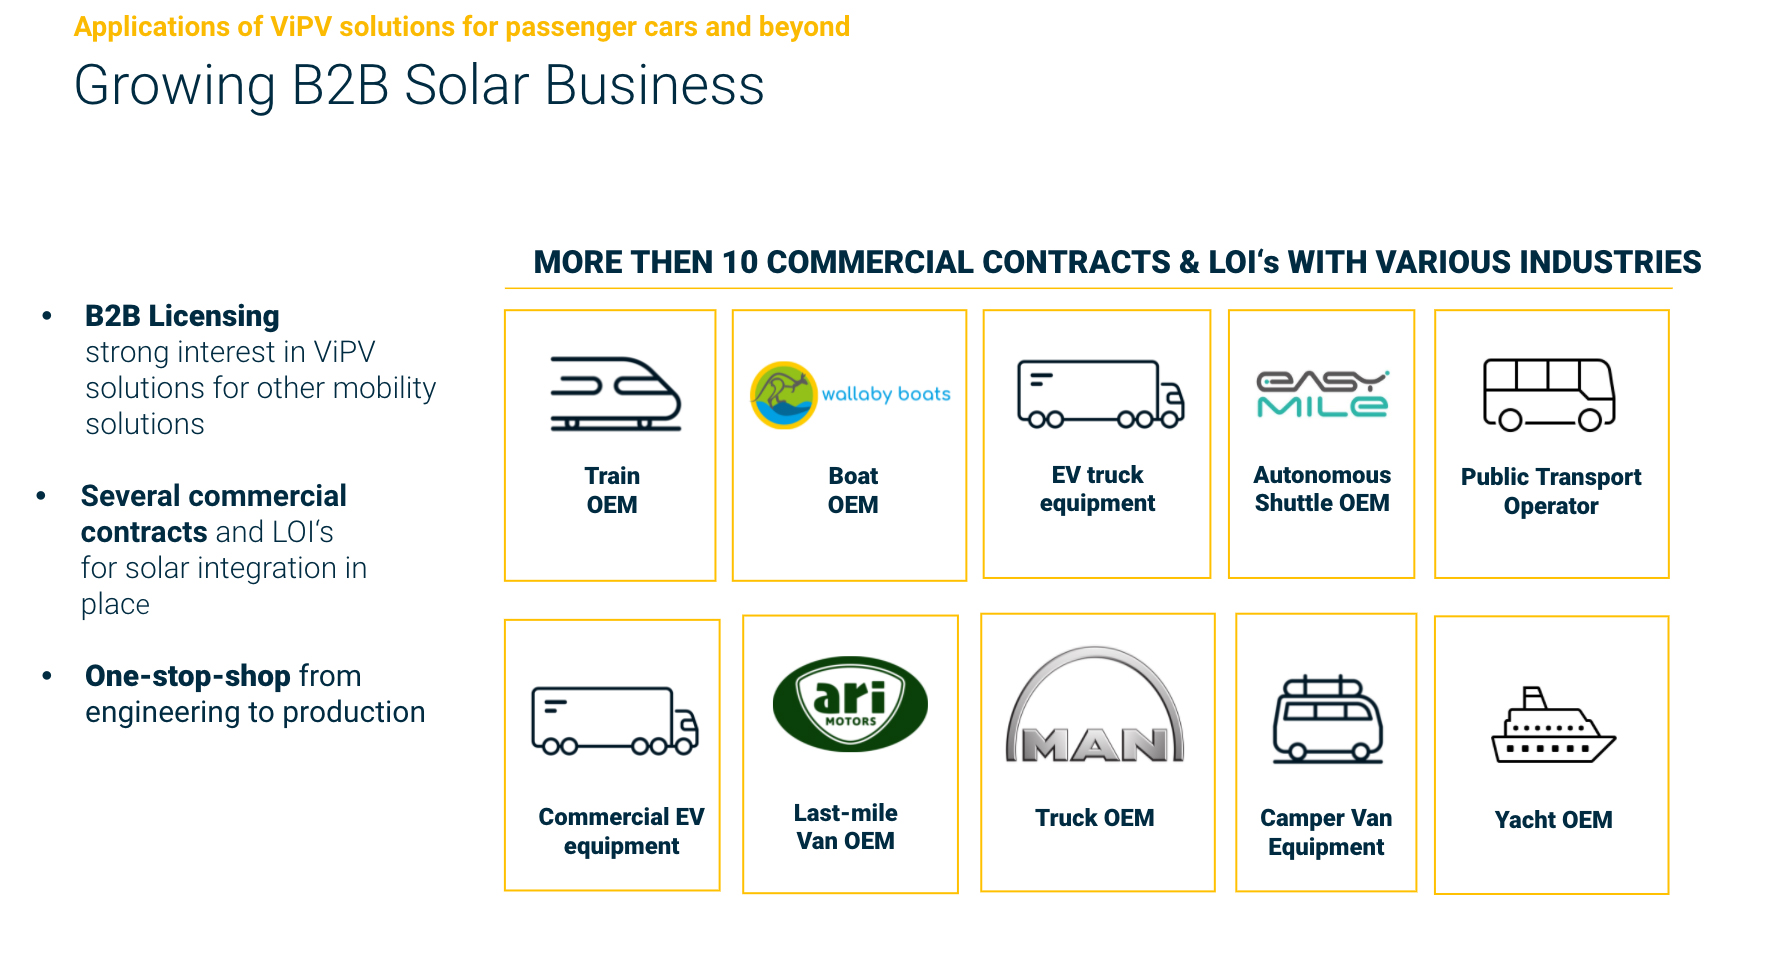 A rising number of companies are interested in using solar integration.